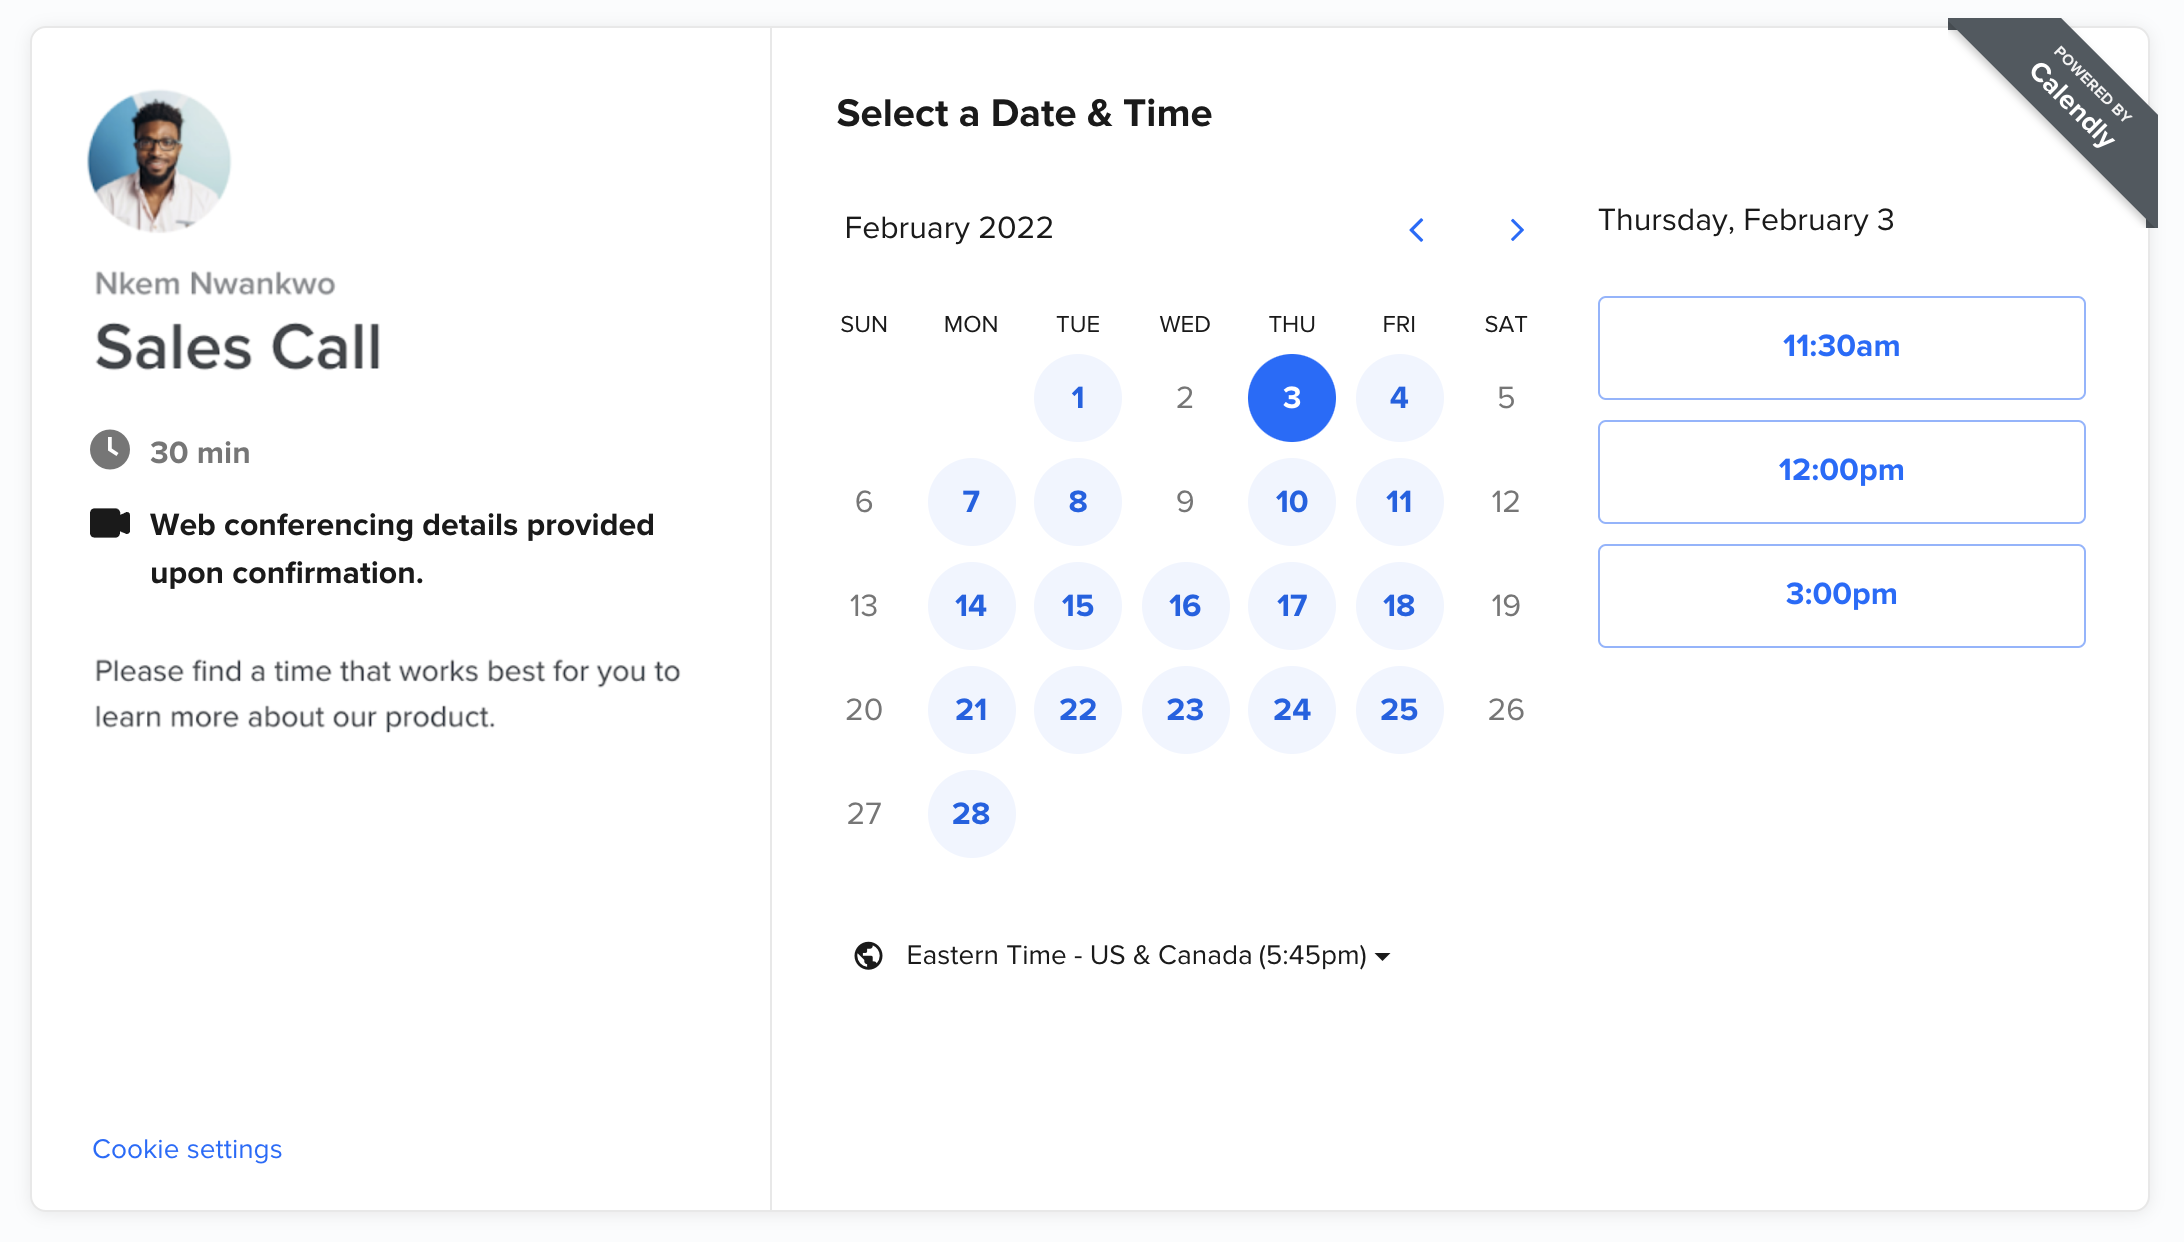 Calendly Booking page for a 30-minute sales call